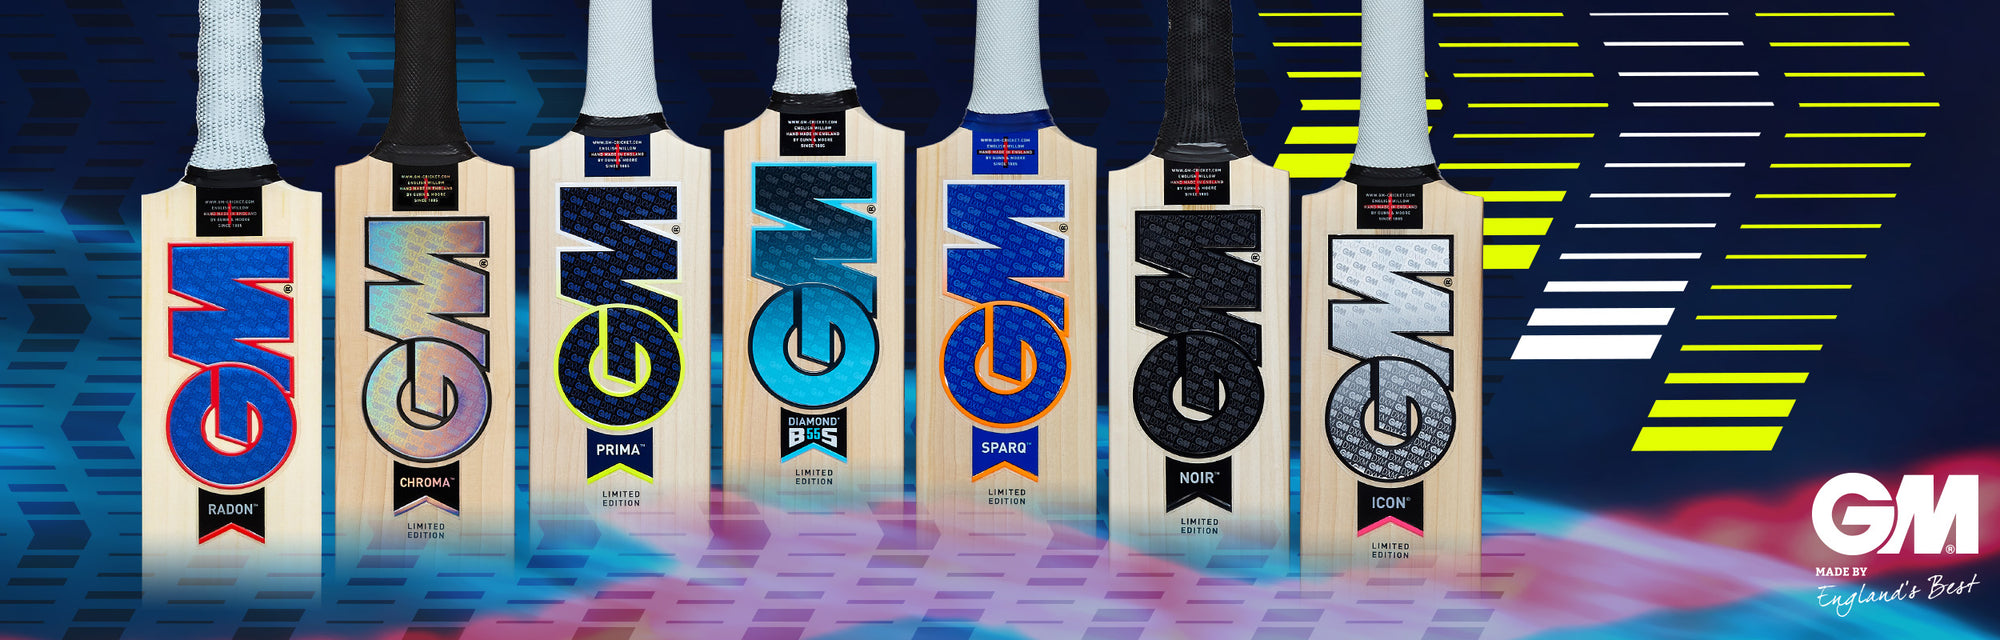 Cricket Zone USA - Largest Retail Cricket Stores in North America